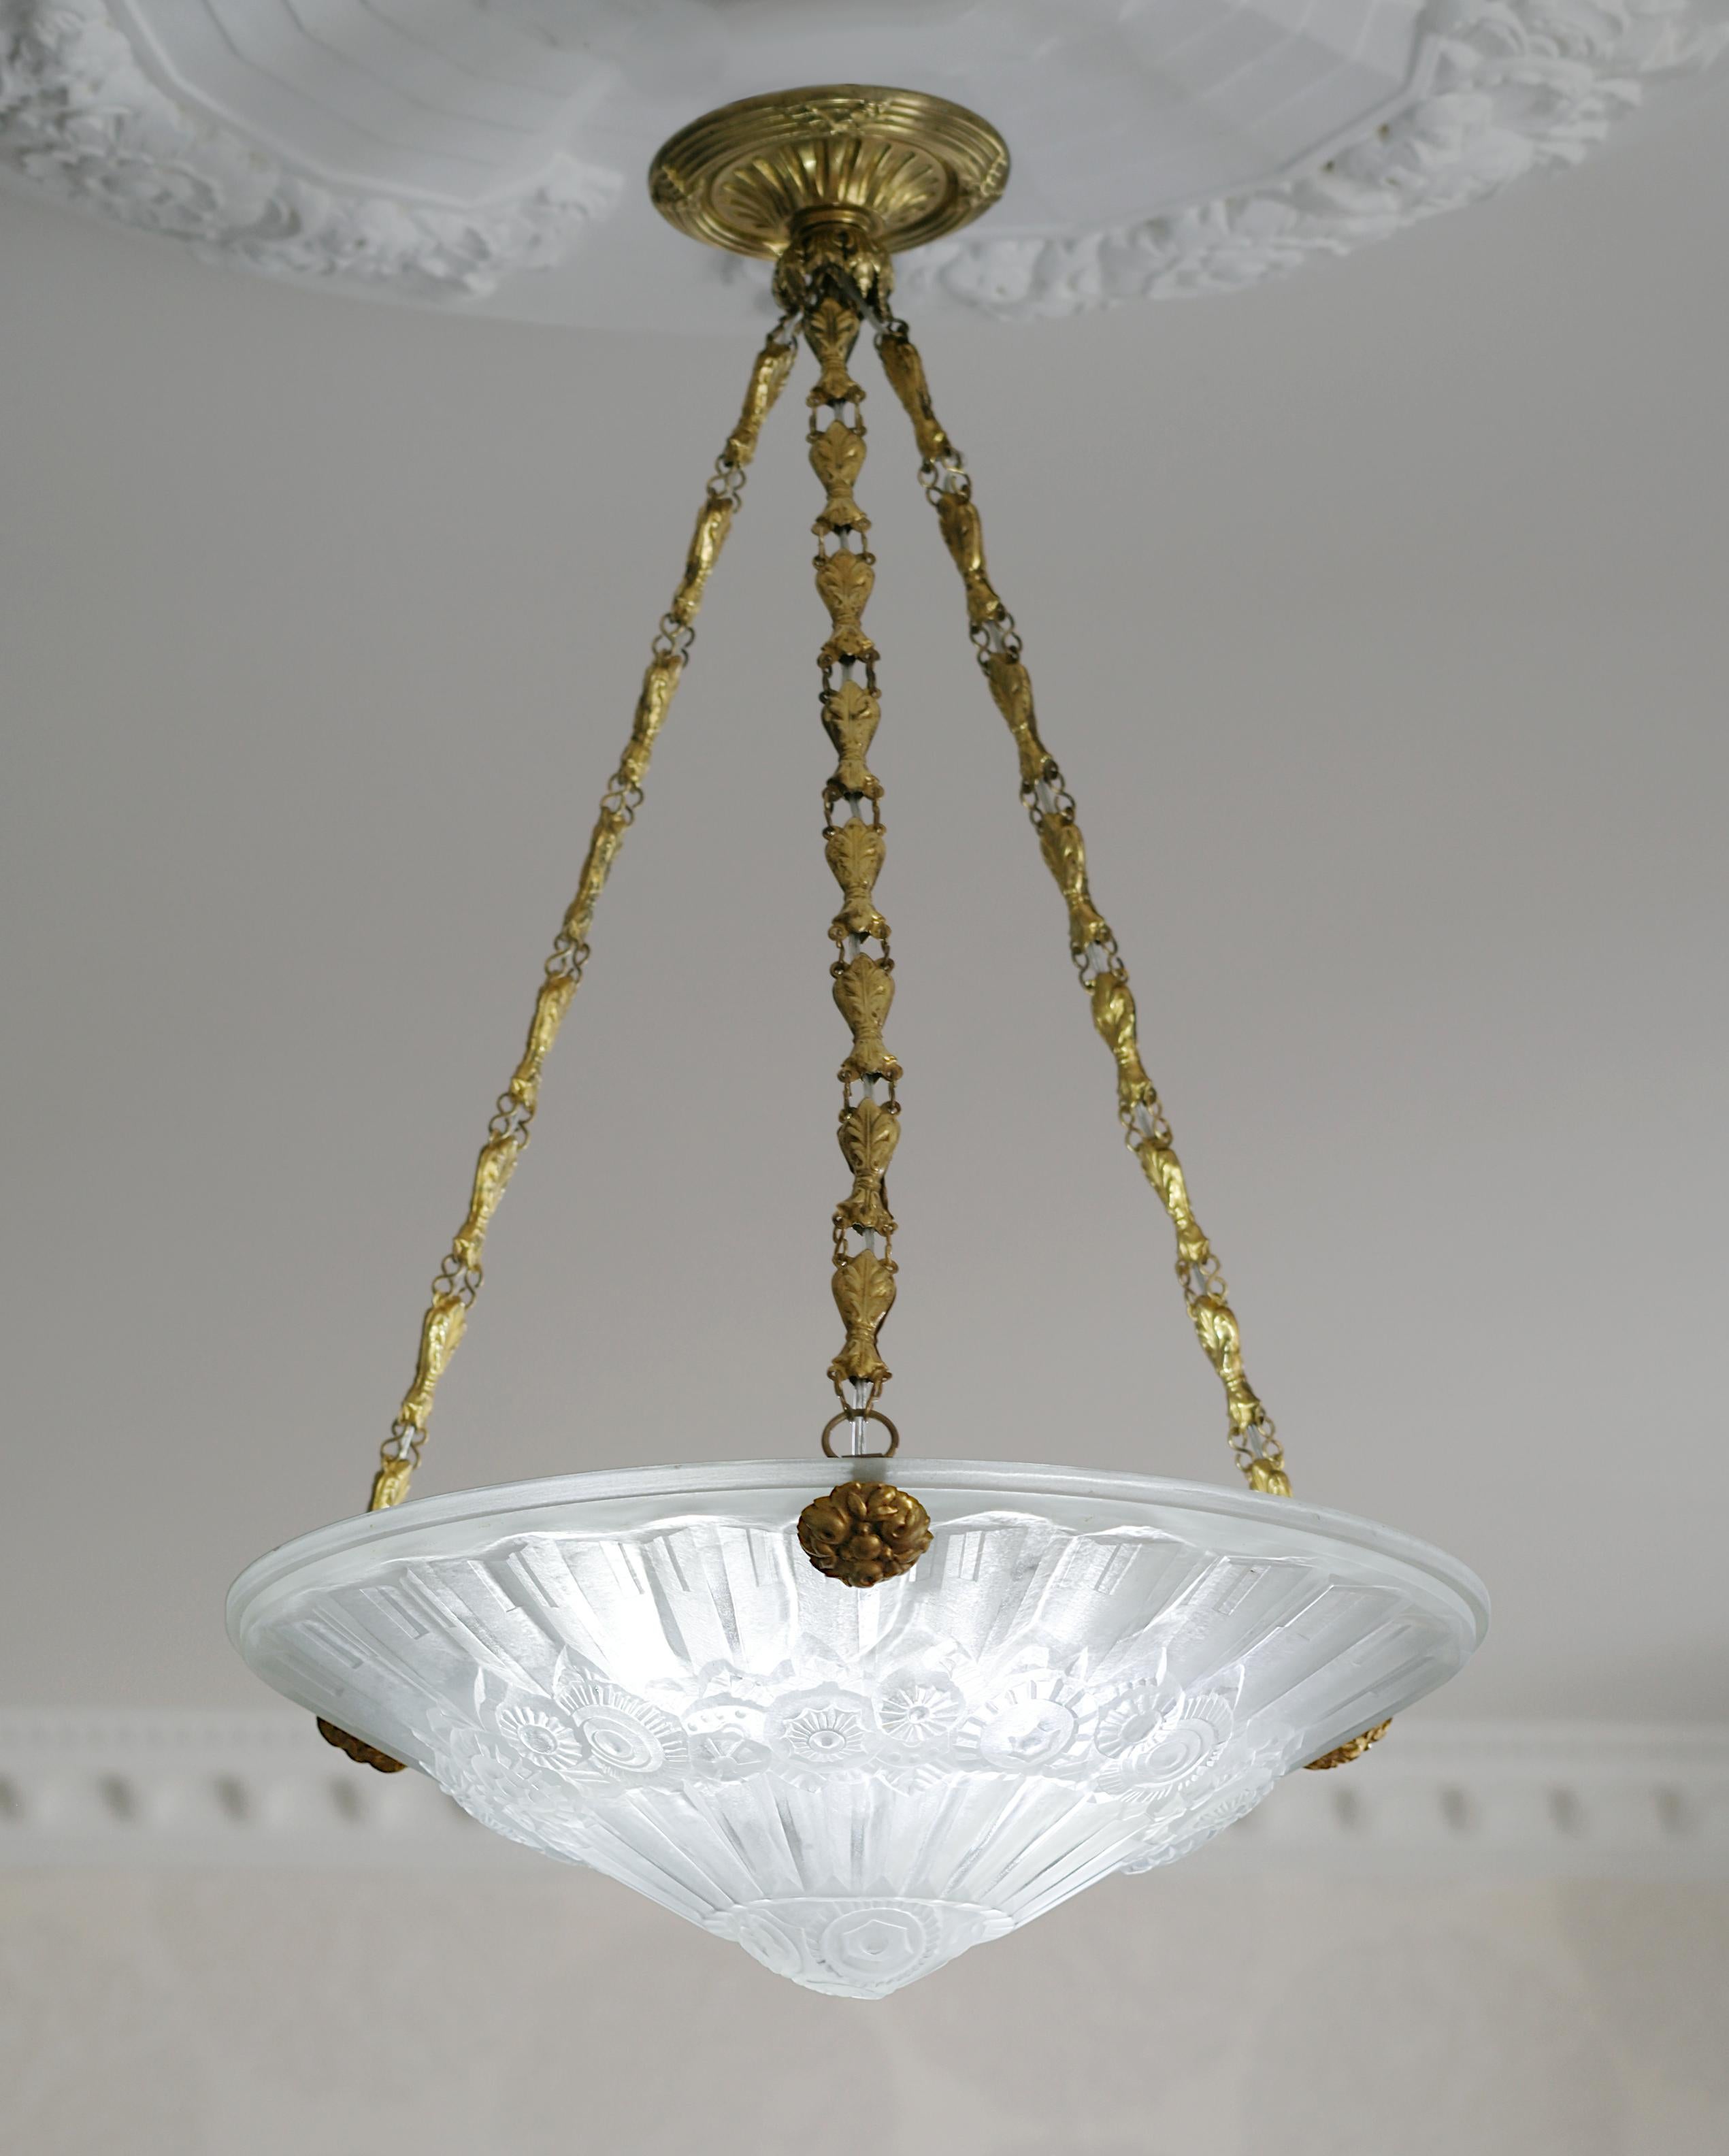 Jean Gauthier French Art Deco Pendant Chandelier, Late 1920s For Sale 1